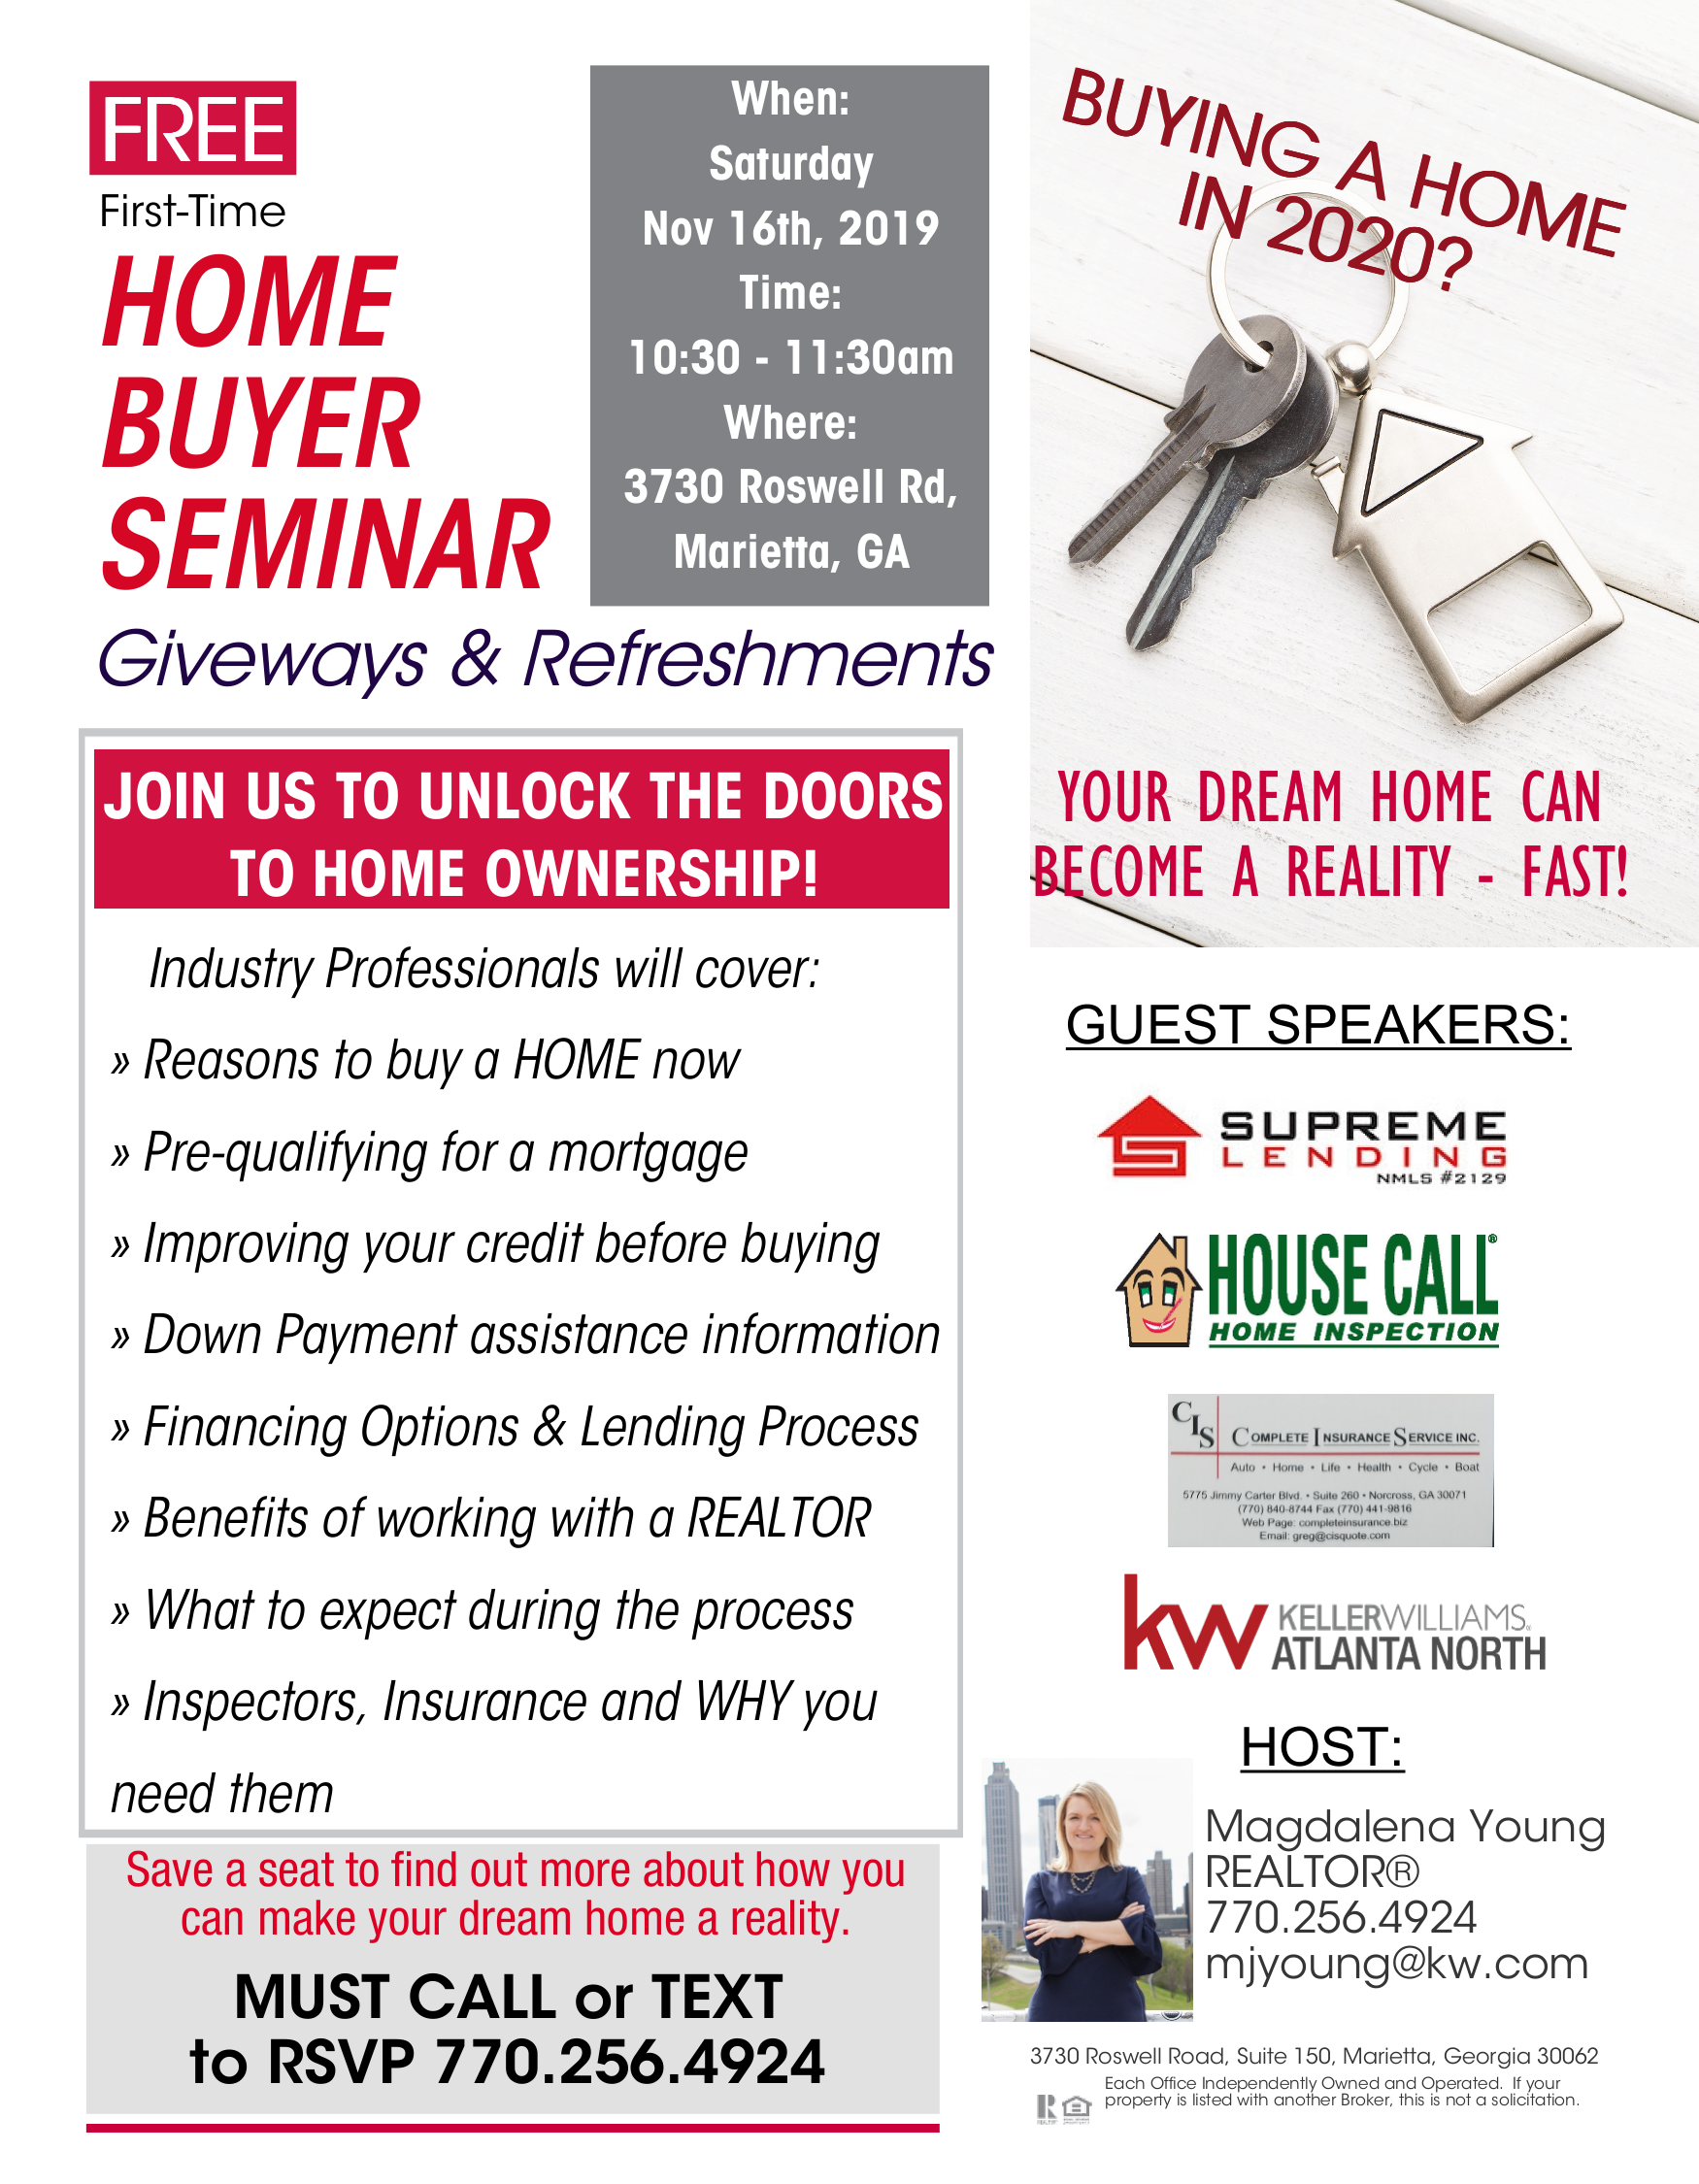 1st Time Home Buyer Seminar: JOIN TO UNLOCK THE DOORS TO HOME OWNERSHIP!